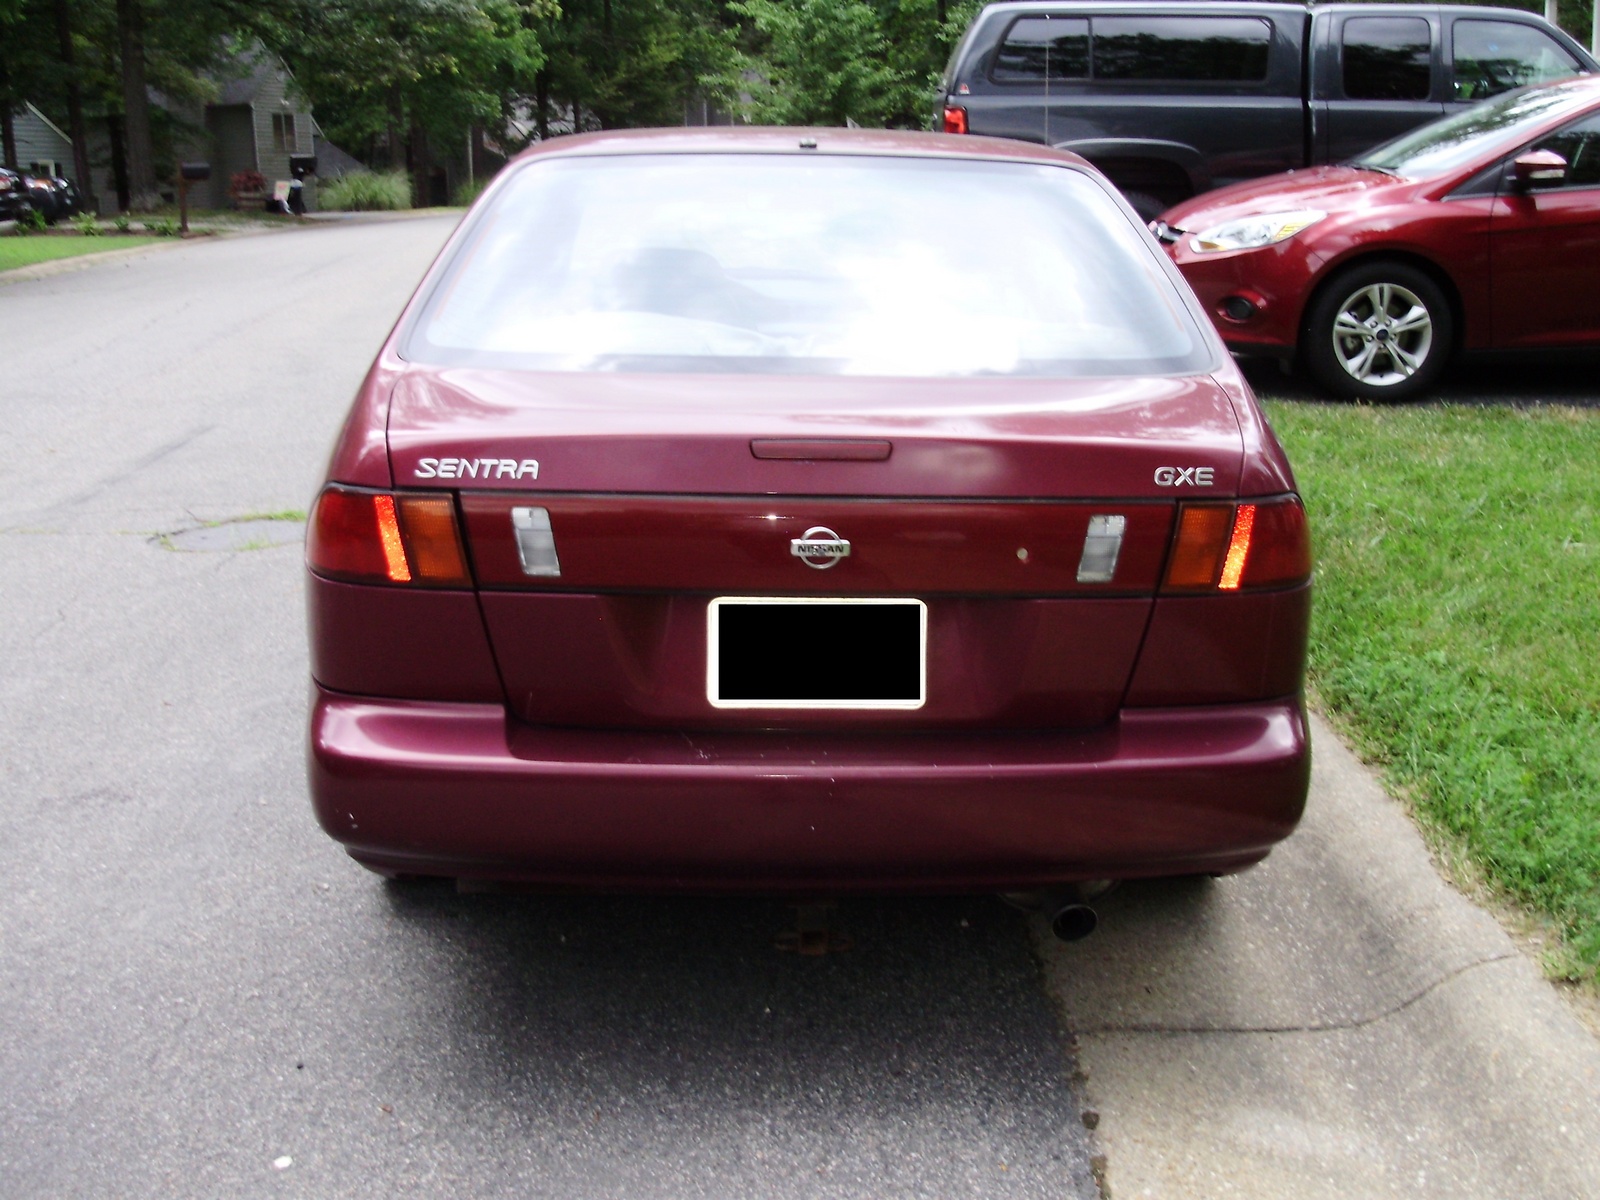 1997 Nissan sentra gxe consumer review